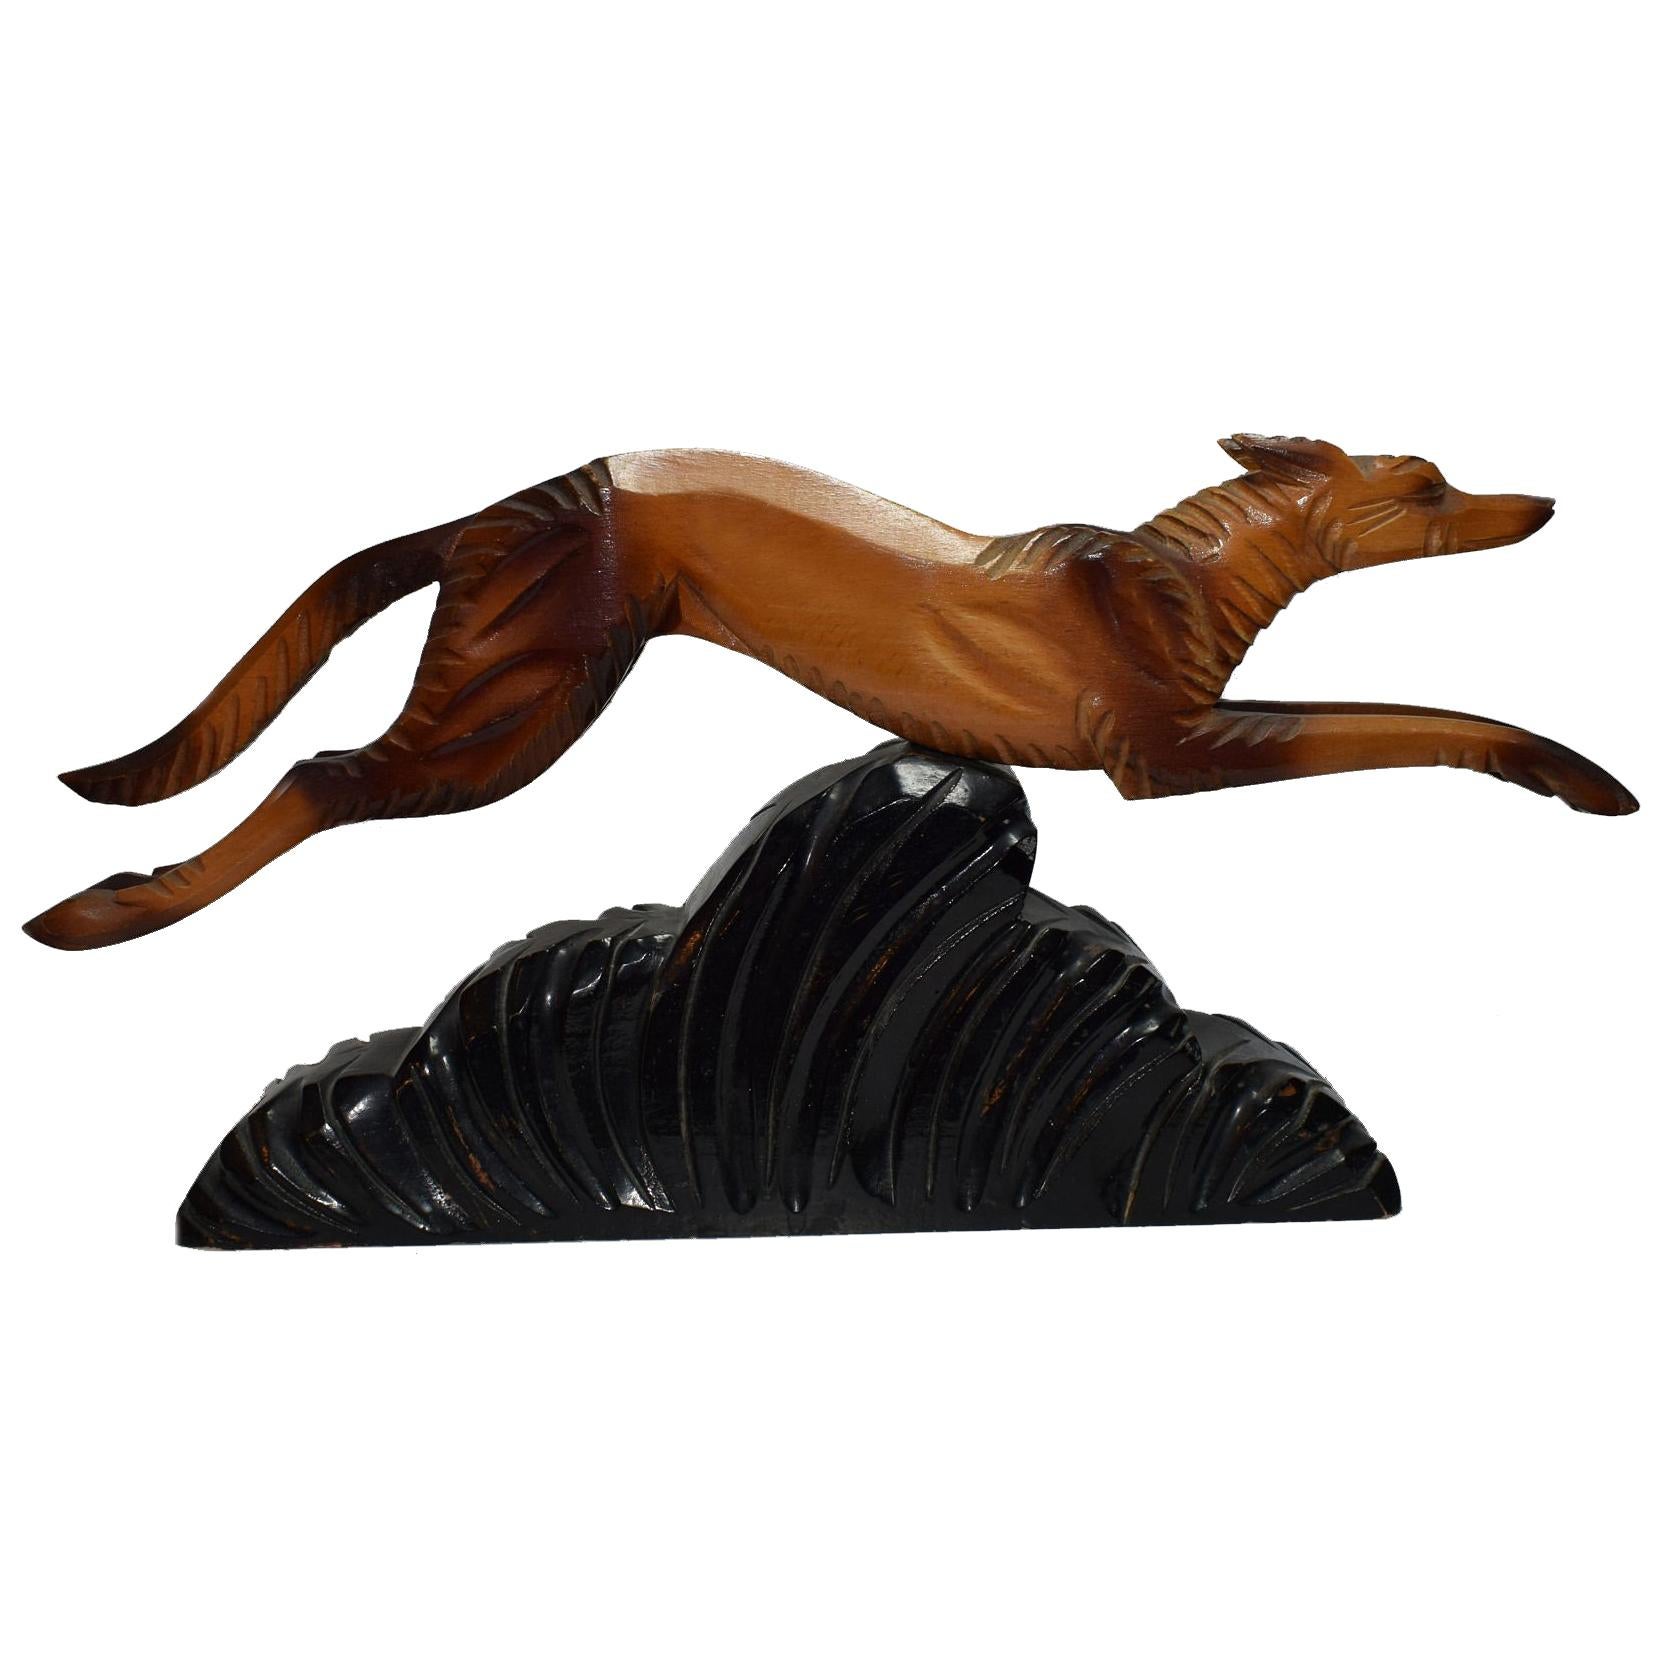 1930s Art Deco Figure Depicting a Leaping Dog For Sale